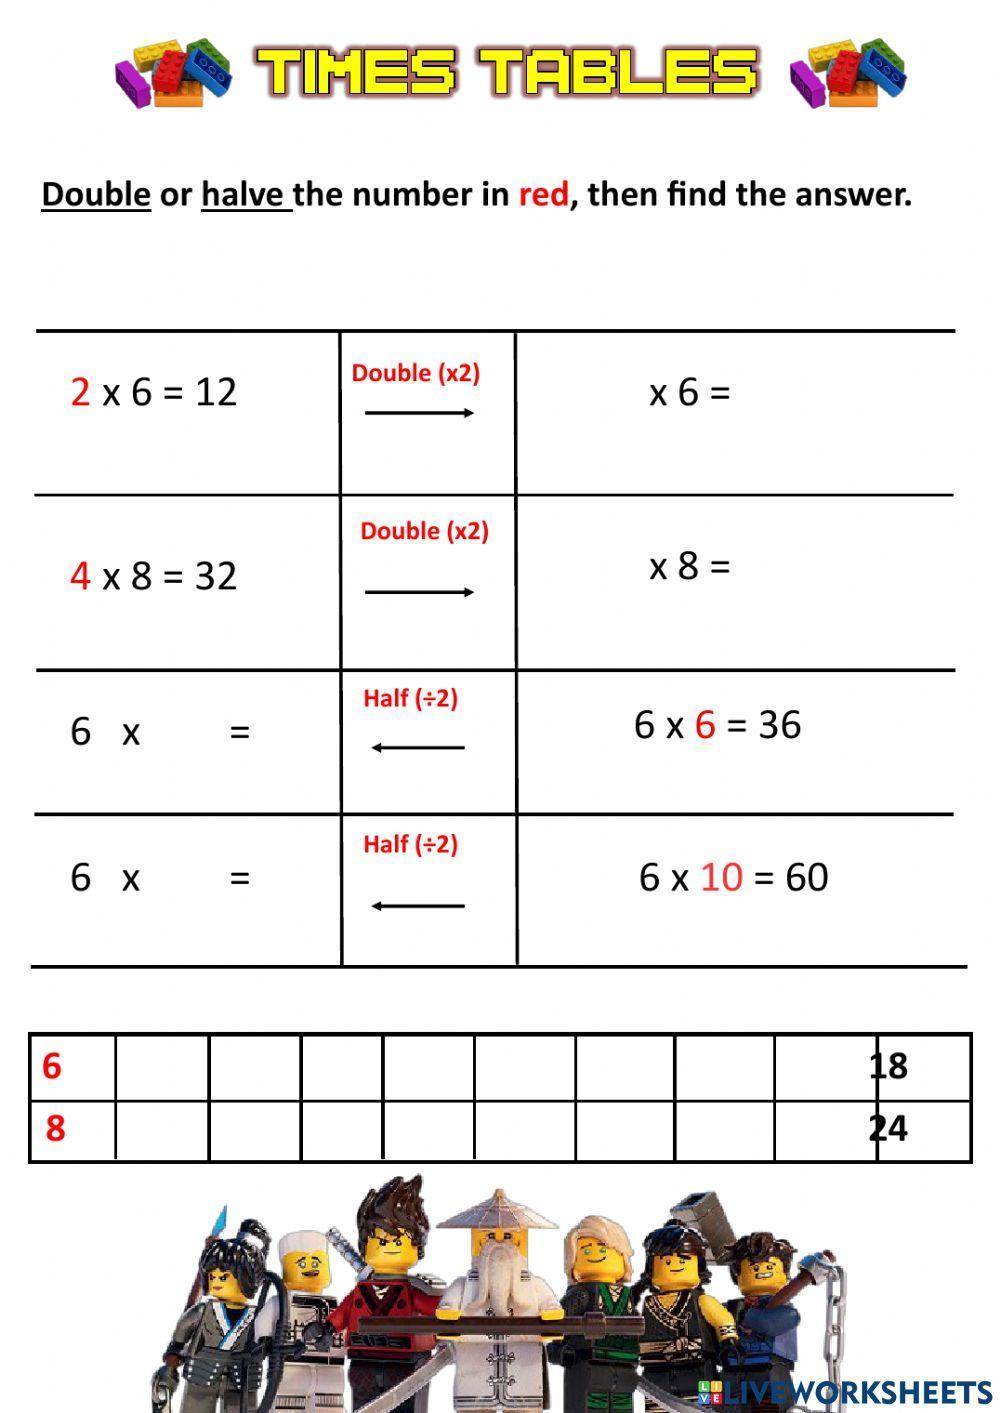 Multiplication Review